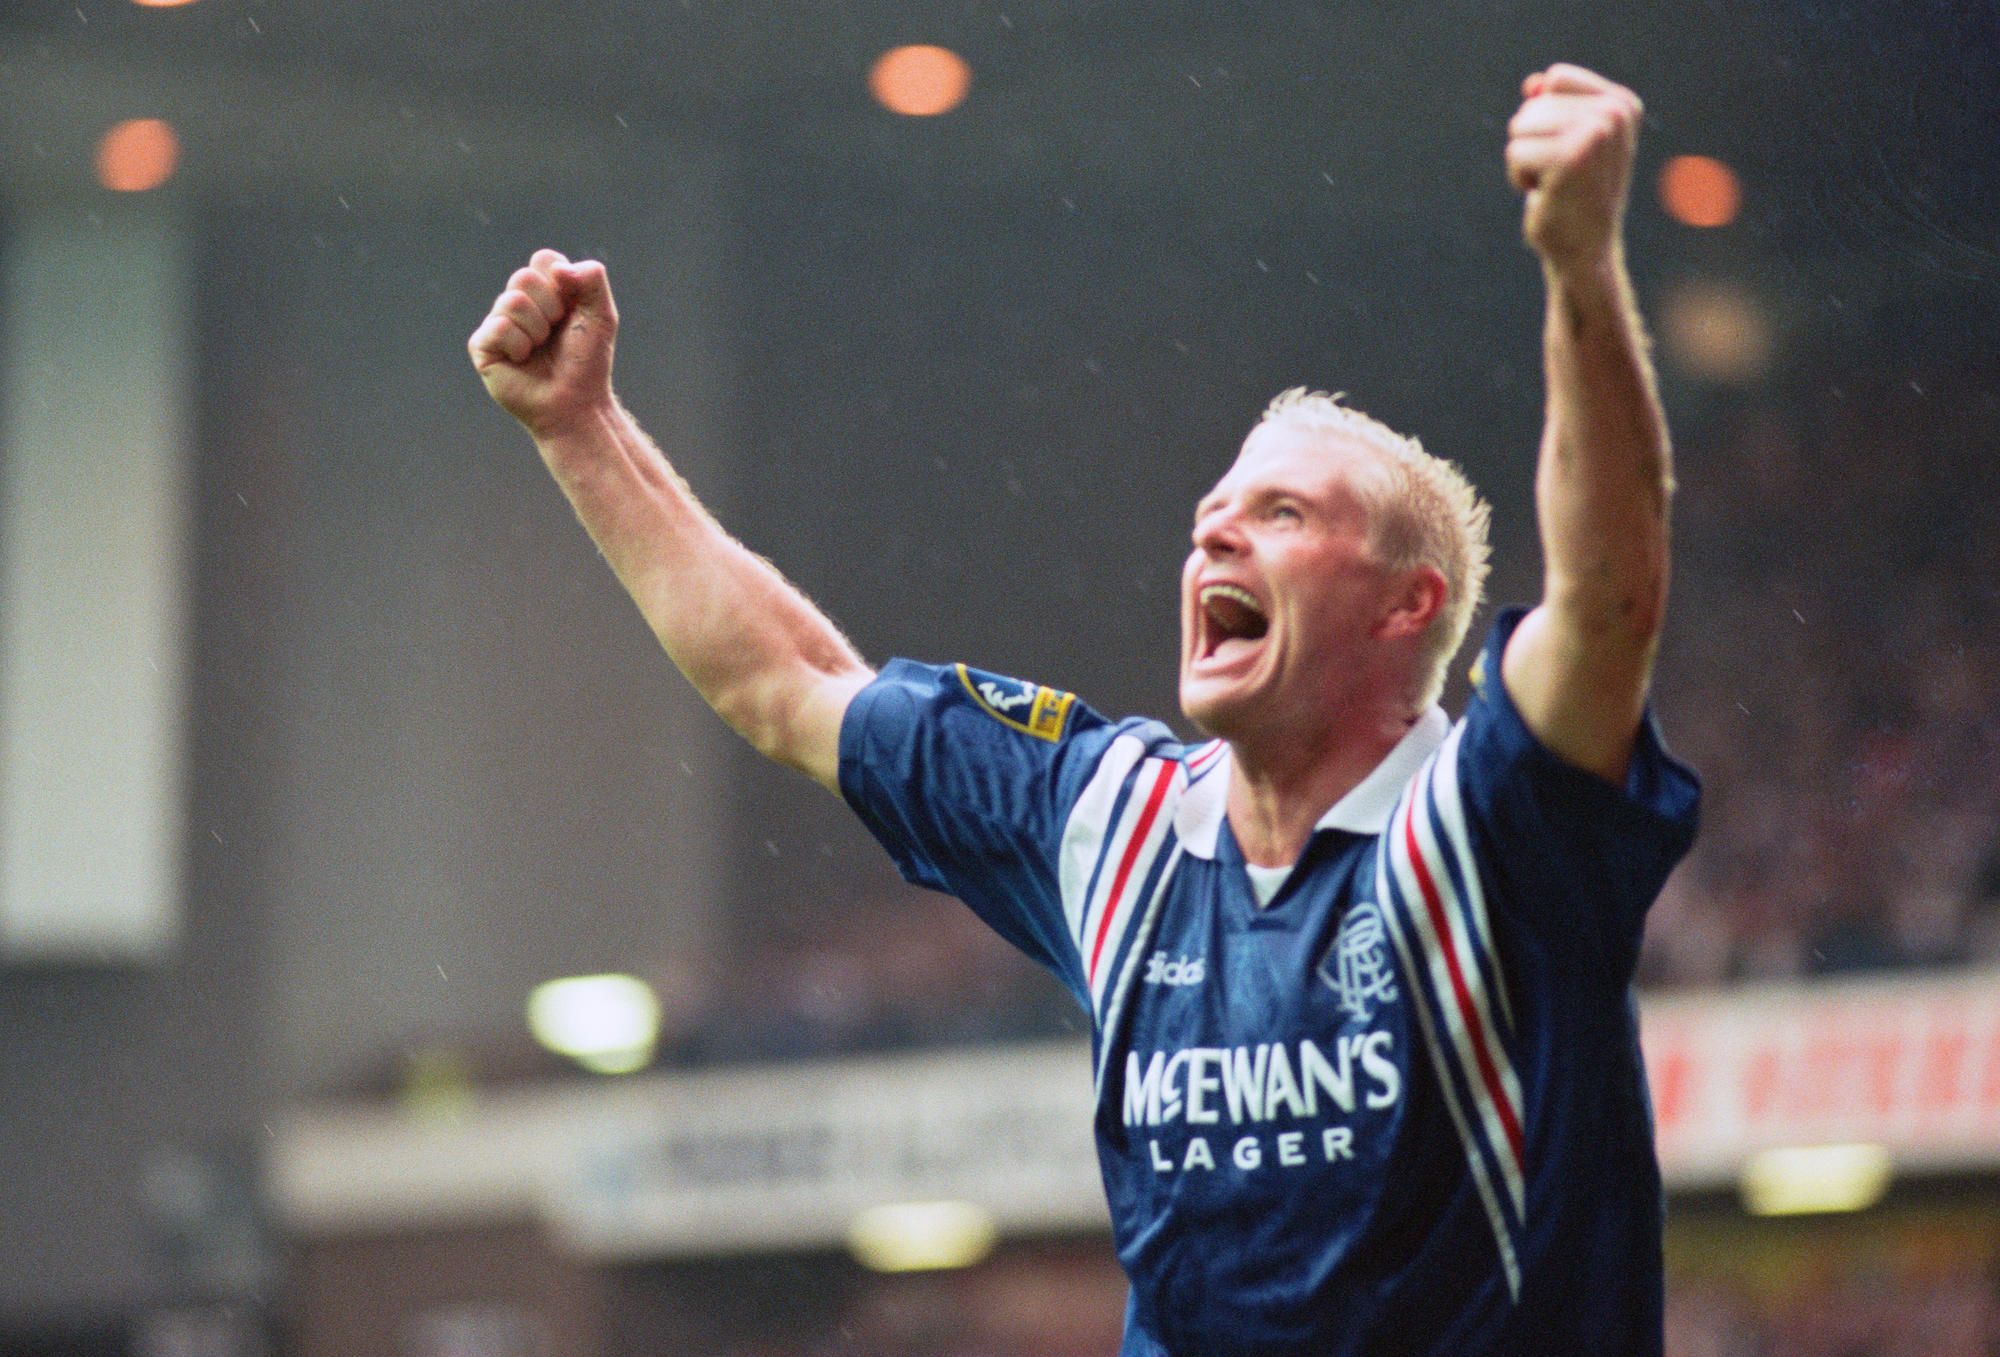 Rangers football player Paul Gascoigne, arms raised in joy after scoring a goal in their 2-0 victory over Celtic in the Scottish Premier League old firm match at Ibrox.
28th September 1996.